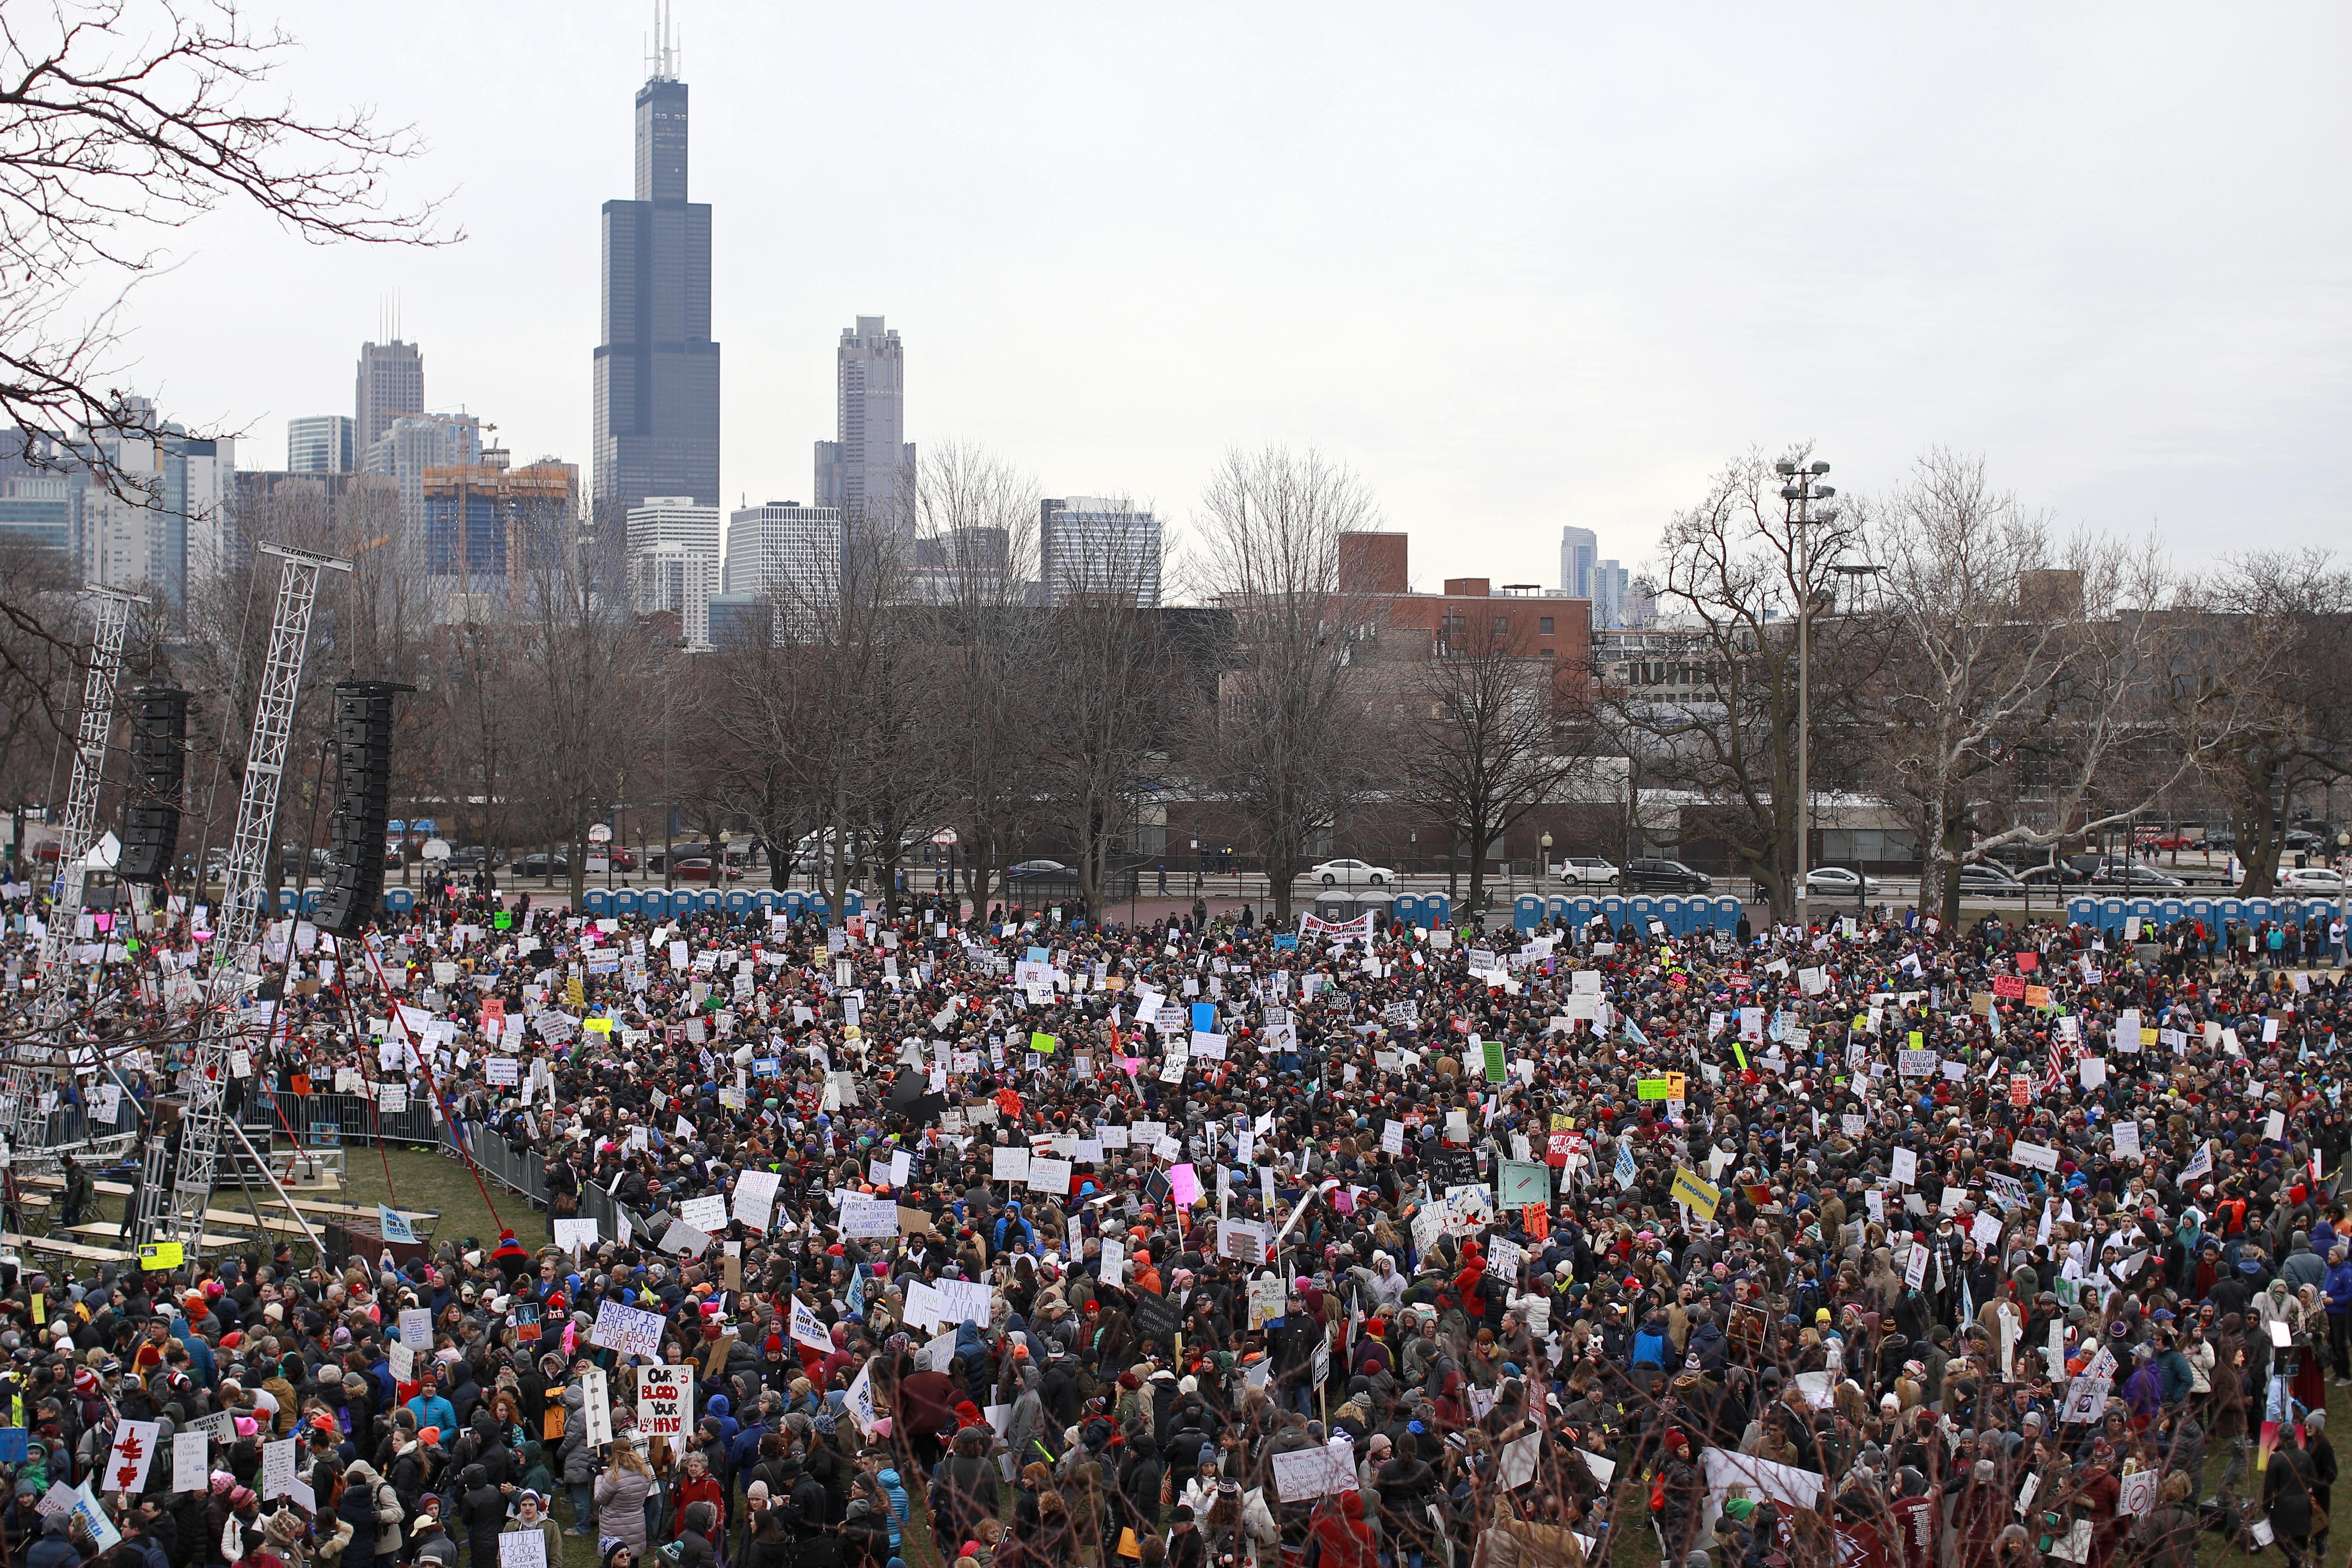 CHICAGO, IL - MARCH 24: Protestors gather for the March for Our Lives rally on March 24, 2018 in Chicago, Illinois. More than 800 March for Our Lives events, organized by survivors of the Parkland, Florida school shooting on February 14 that left 17 dead, are taking place around the world to call for legislative action to address school safety and gun violence. (Photo by Jim Young/Getty Images)